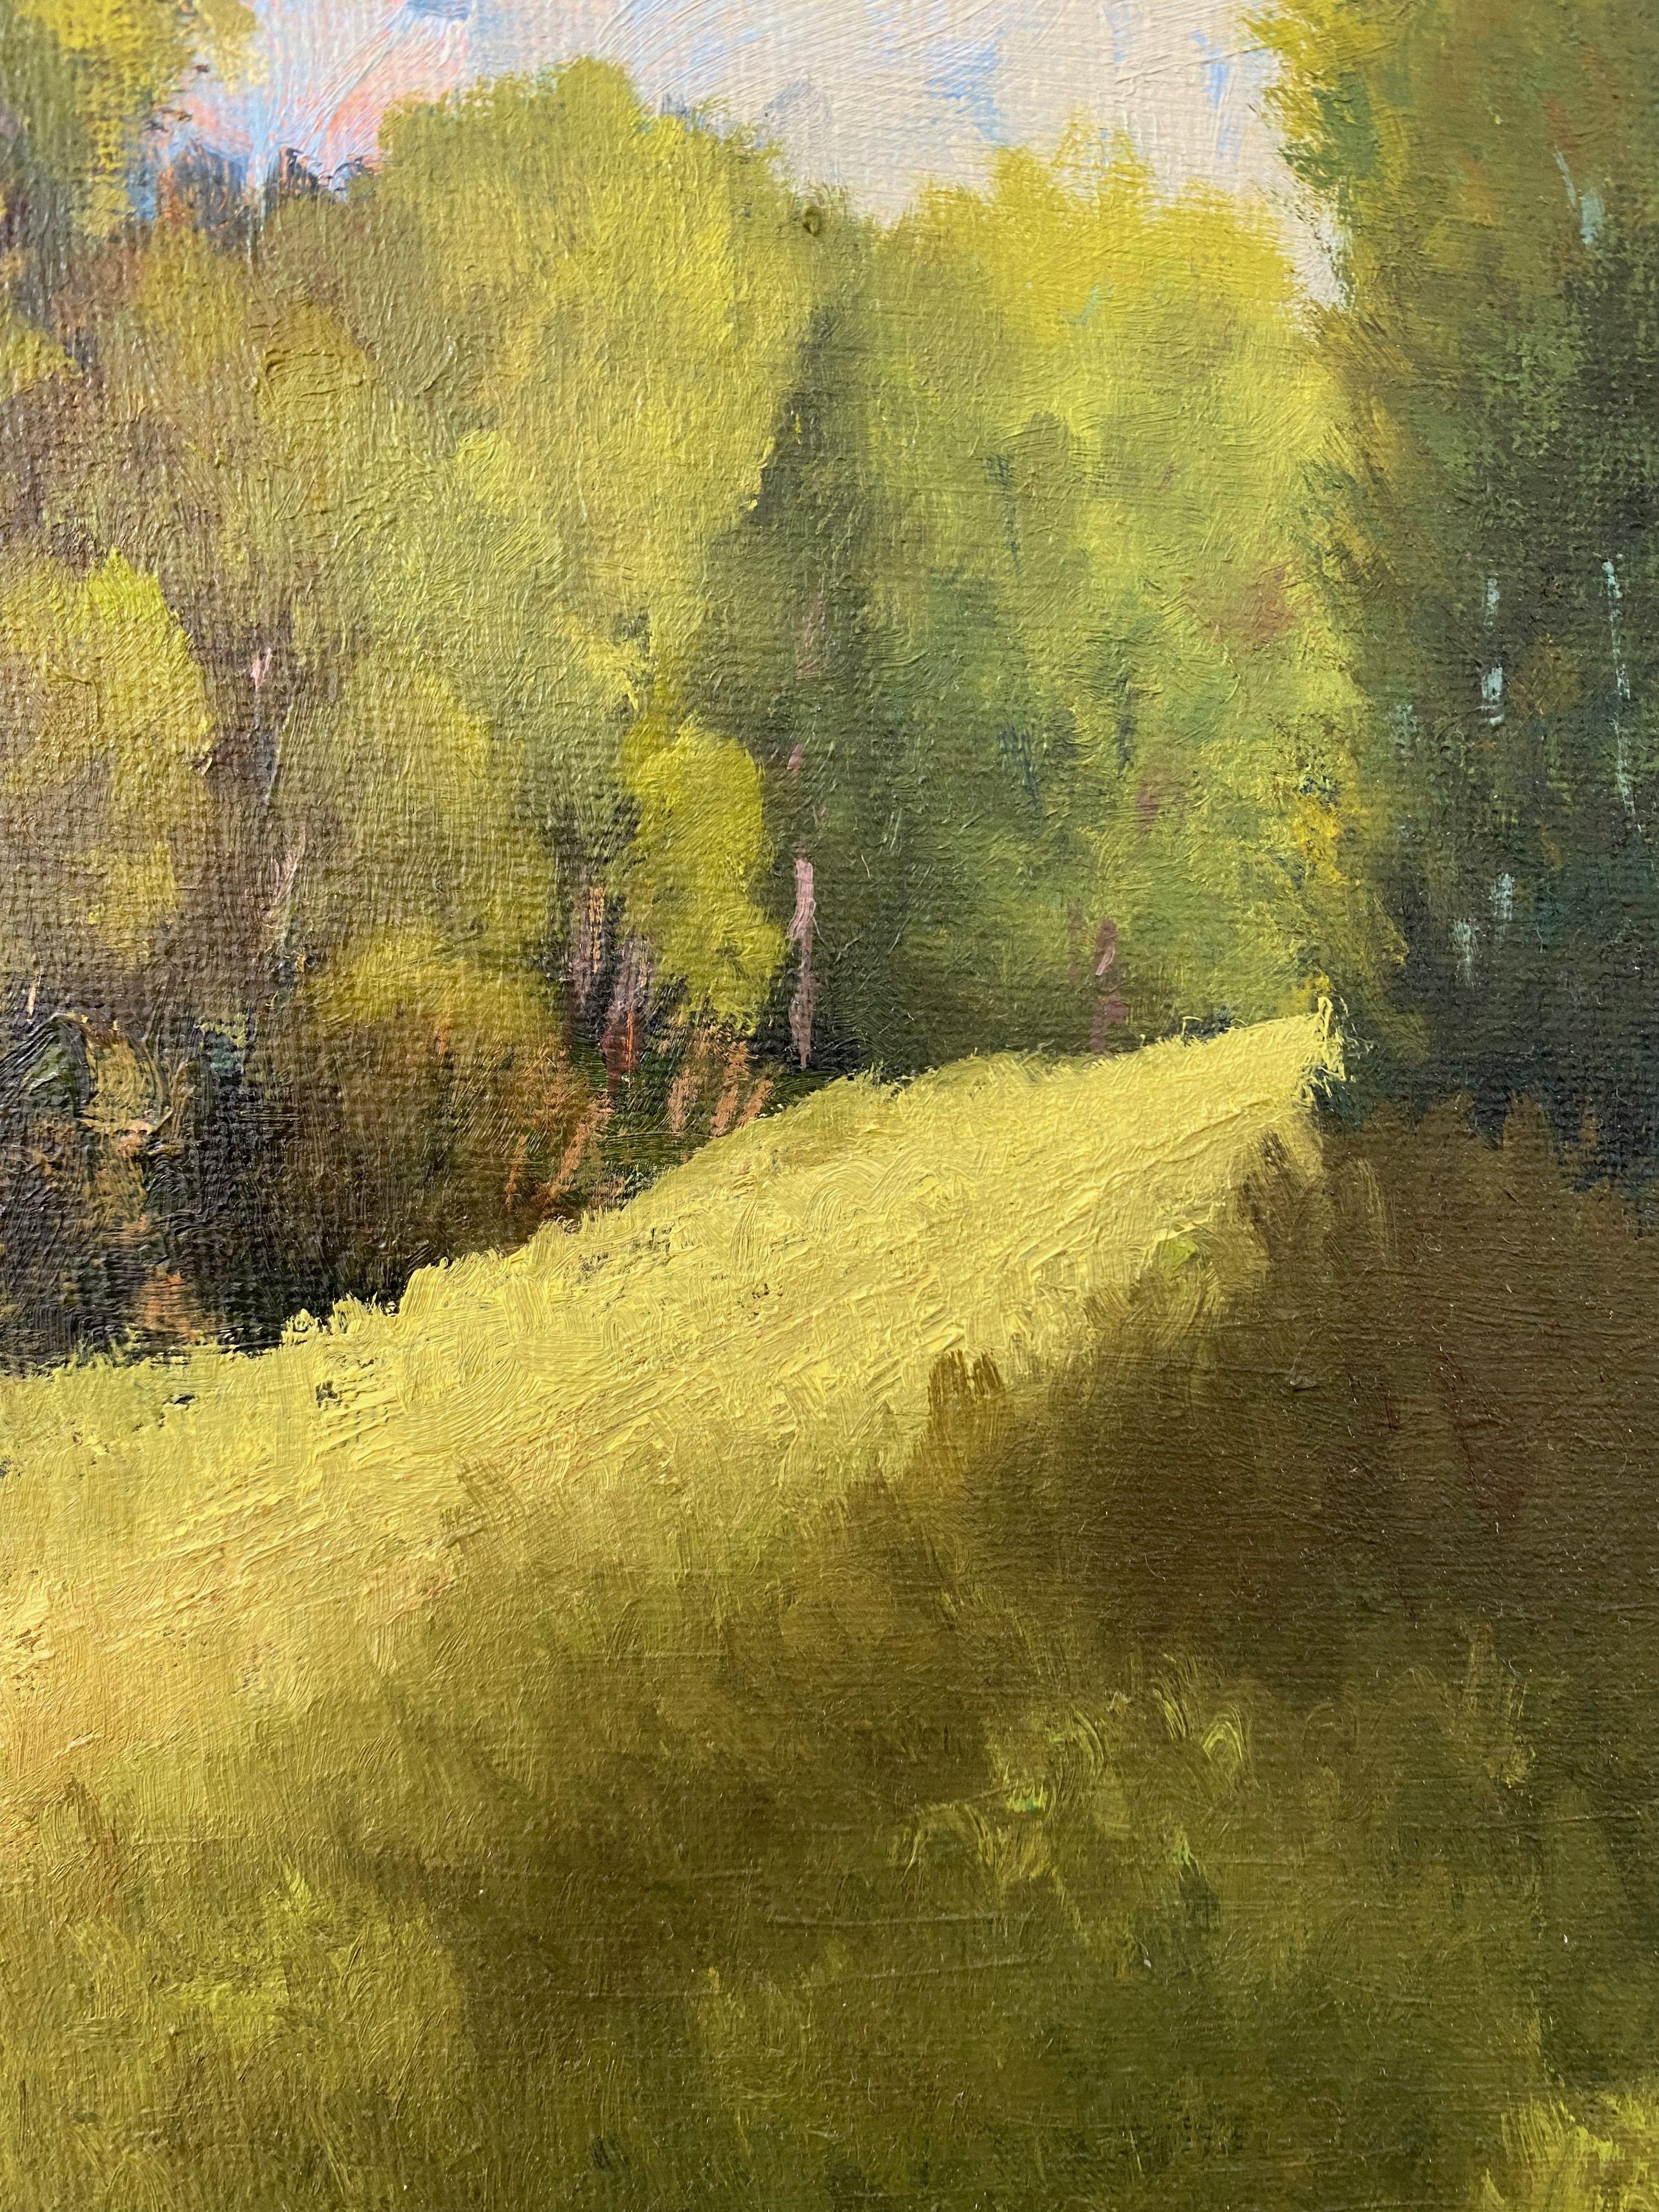 Painted in 2016. Inspired by a clearing in a nearby wood :: Painting :: Impressionist :: This piece comes with an official certificate of authenticity signed by the artist :: Ready to Hang: Yes :: Signed: Yes :: Signature Location: Bottom right ::